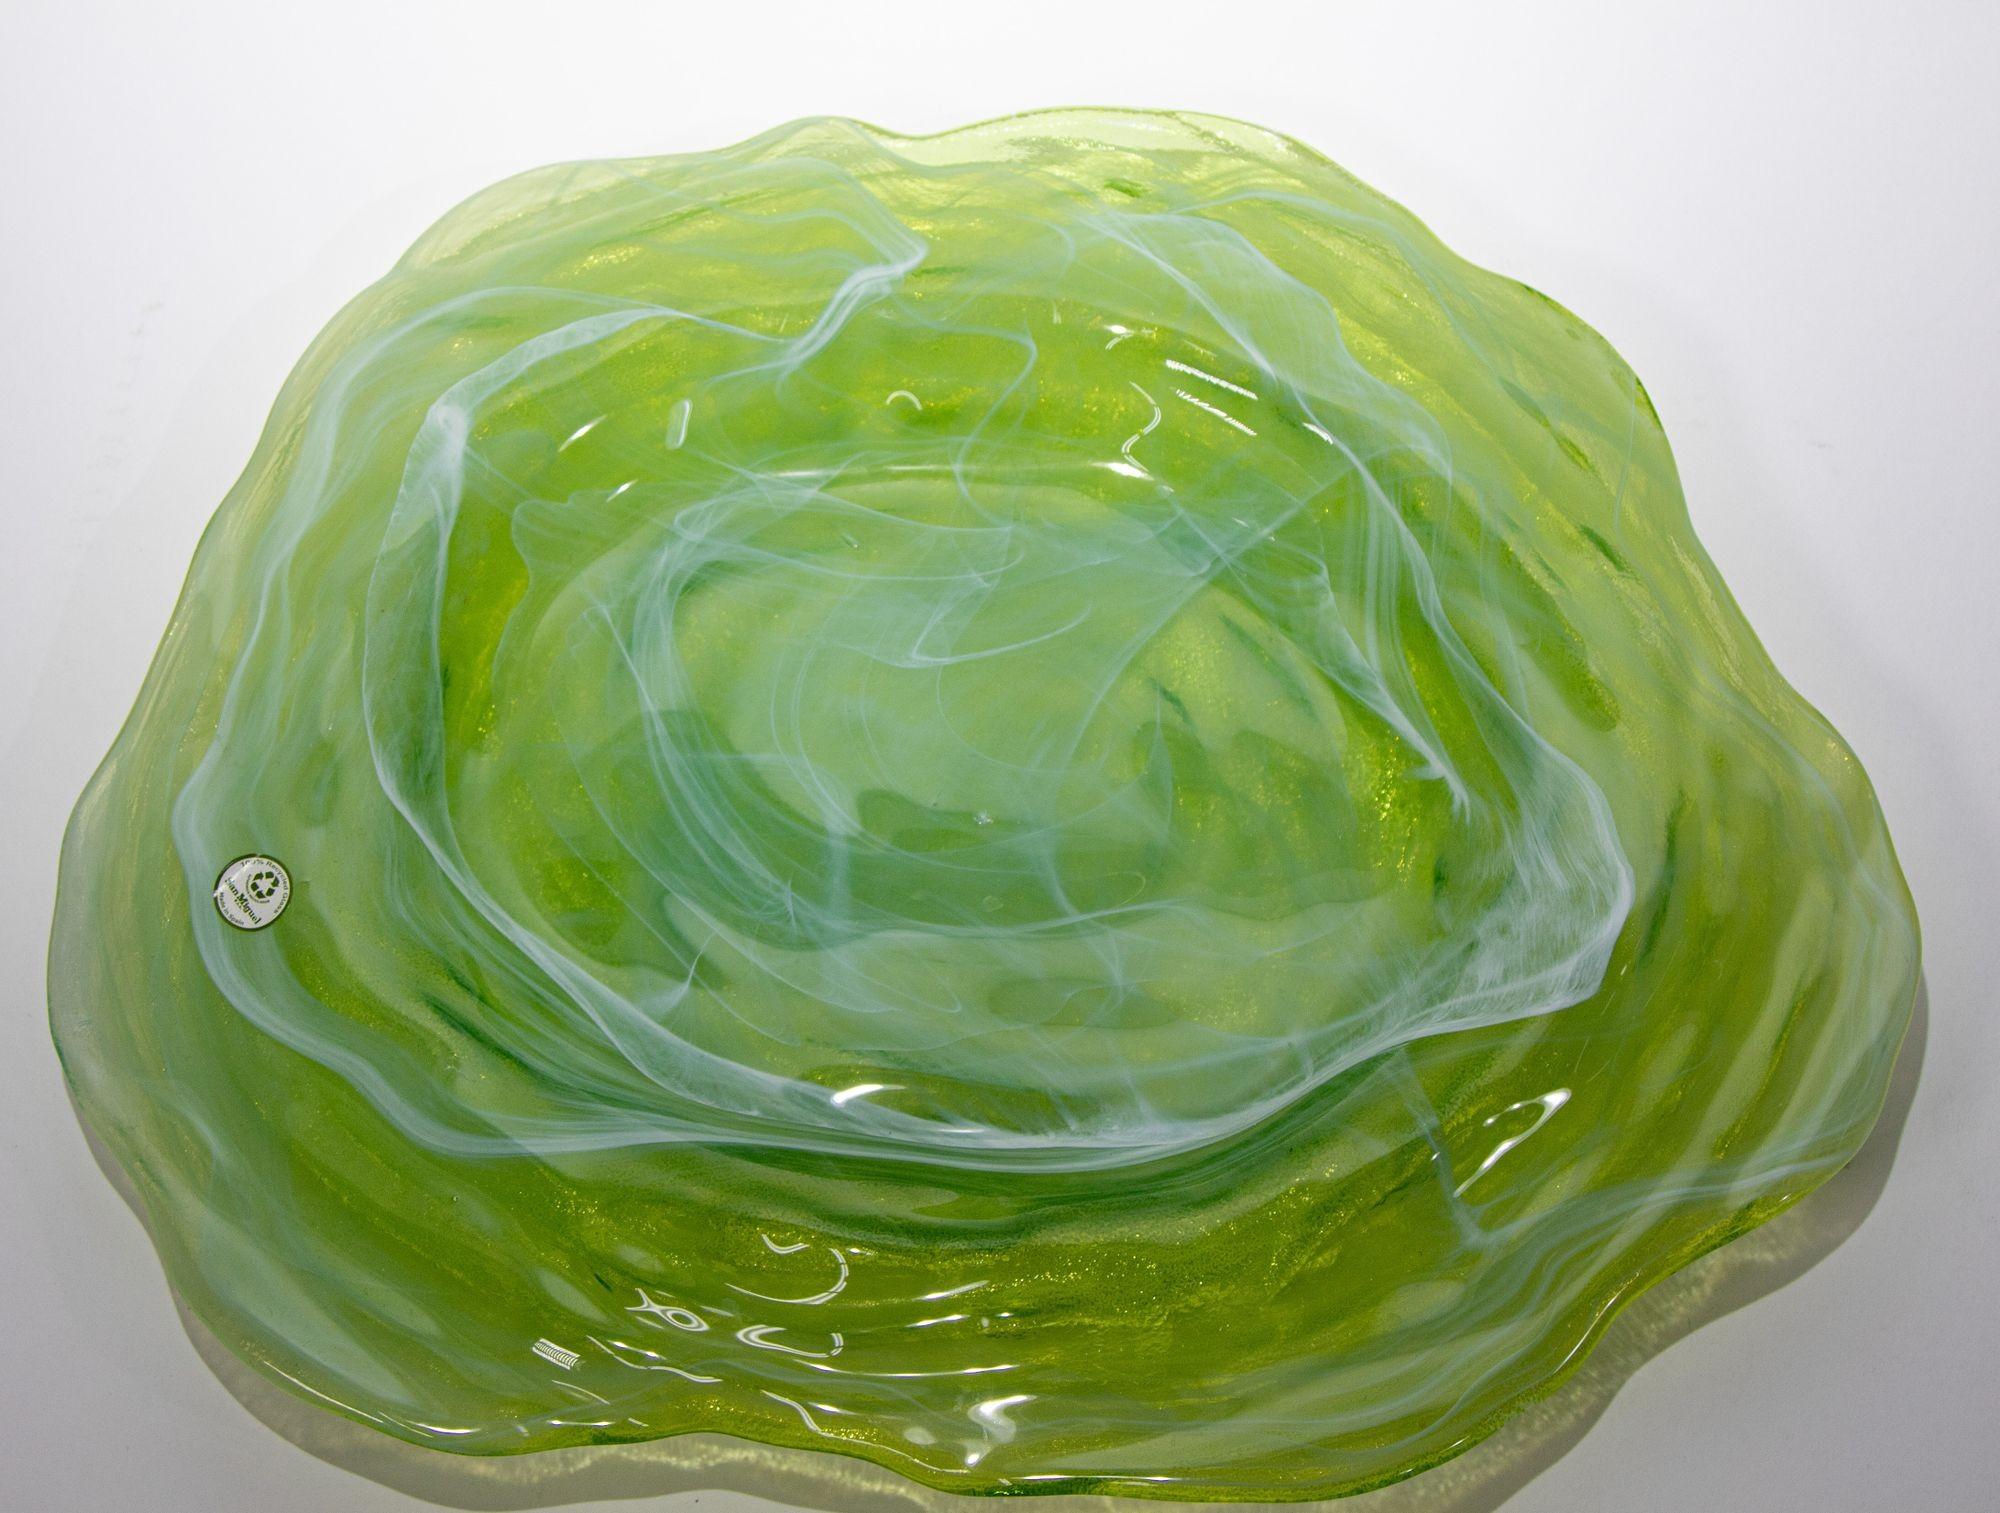 Beautiful green Art glass platter made in Spain.
Green and white swirly glass art bowl hand crafted from recycled glass, round shape free form, great variation in colors and multi dimensional .
The glass is sourced from glass containers which are